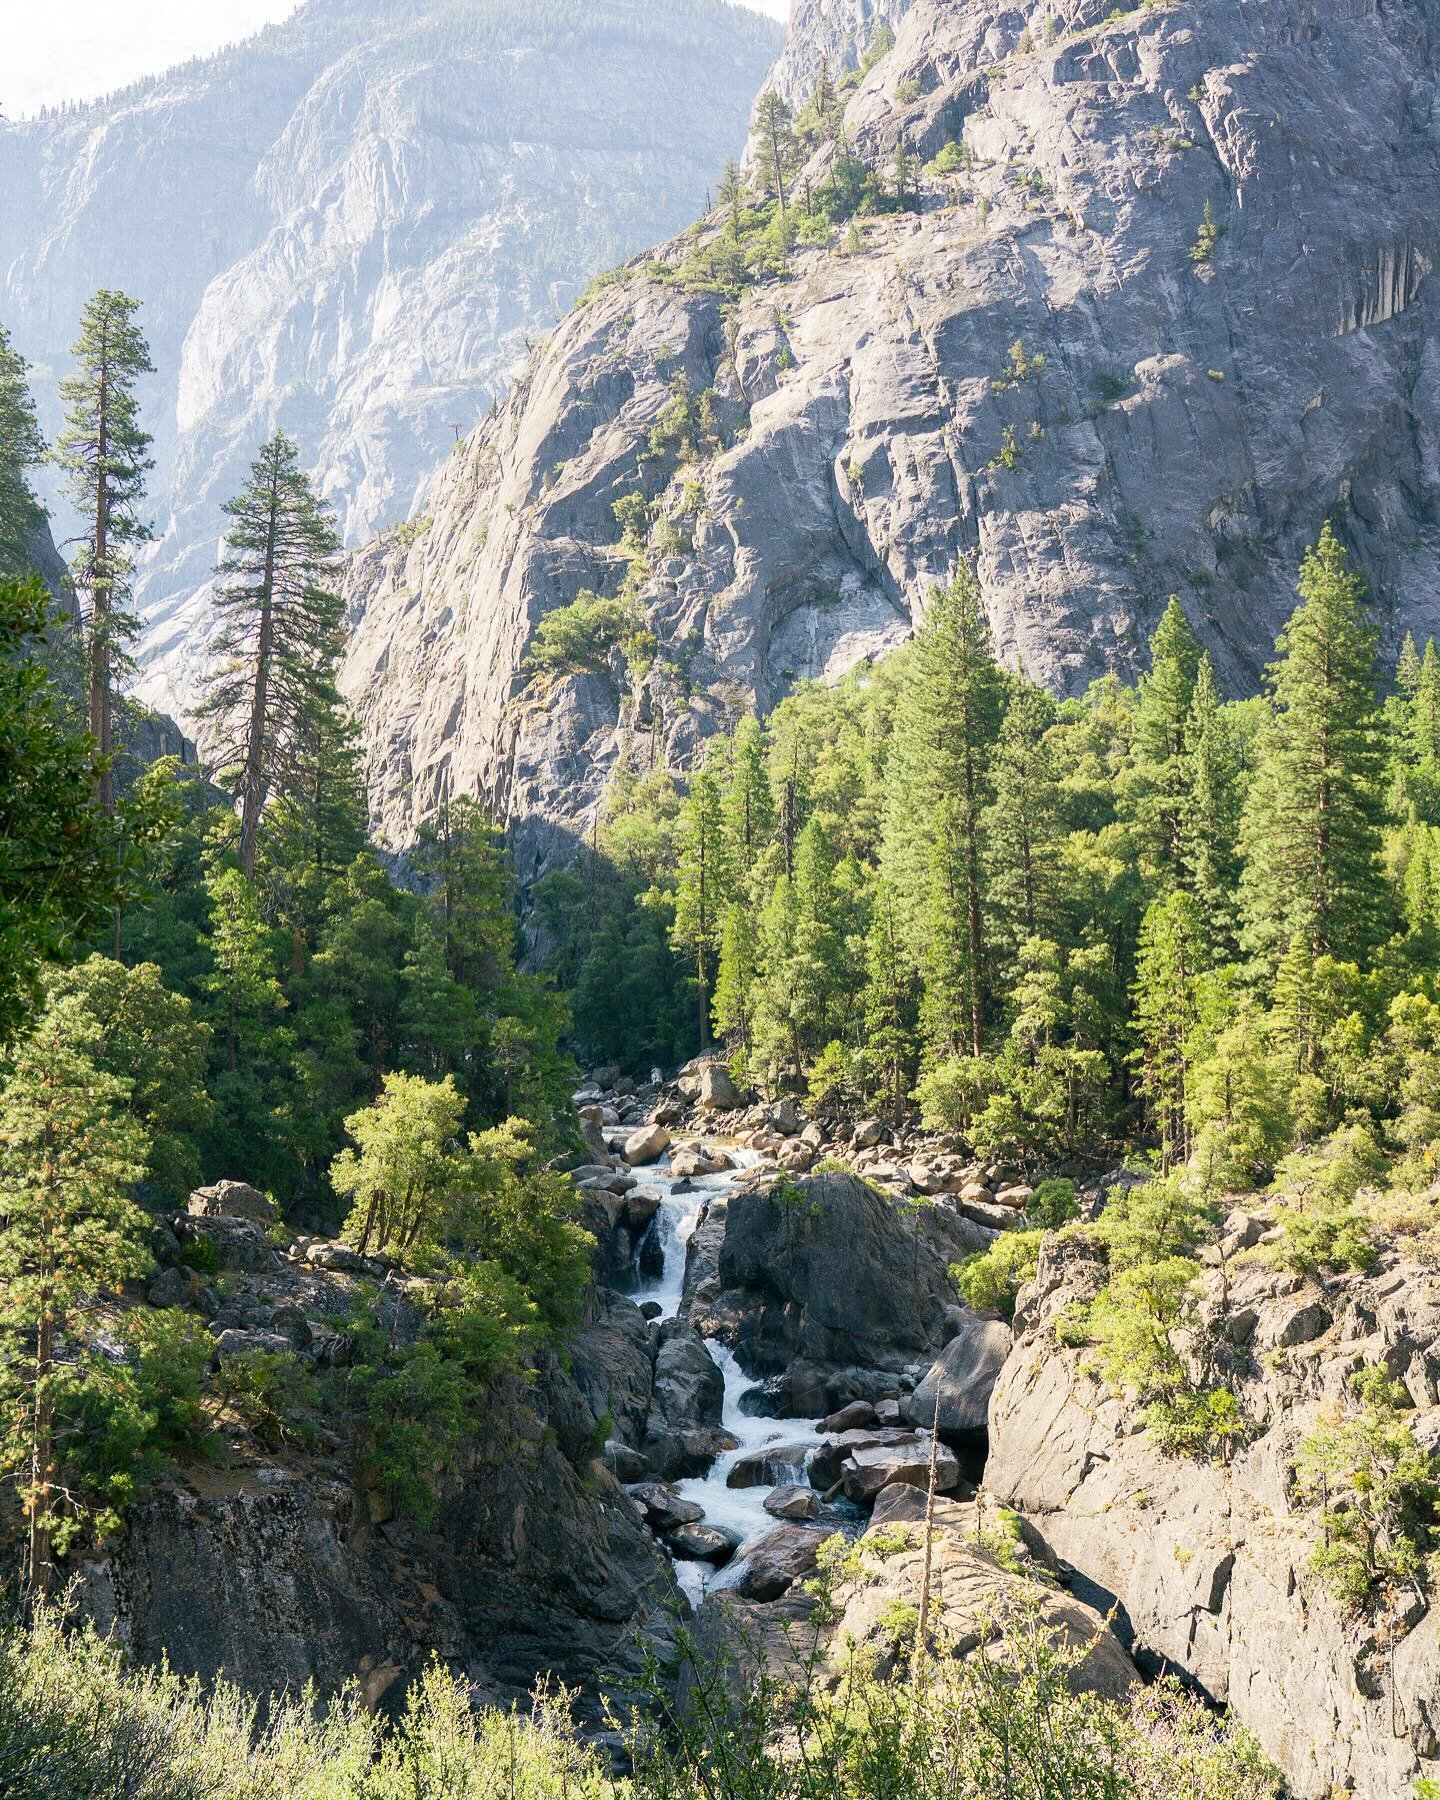 Best thru-hike in Yosemite National Park? Keep reading for all the info! ⬇️&nbsp;You&rsquo;ll want to save this for future reference!

📍Grand Canyon of the Tuolumne

Hiking through the Tuolumne River canyon is a pretty amazing experience. This 30 mi